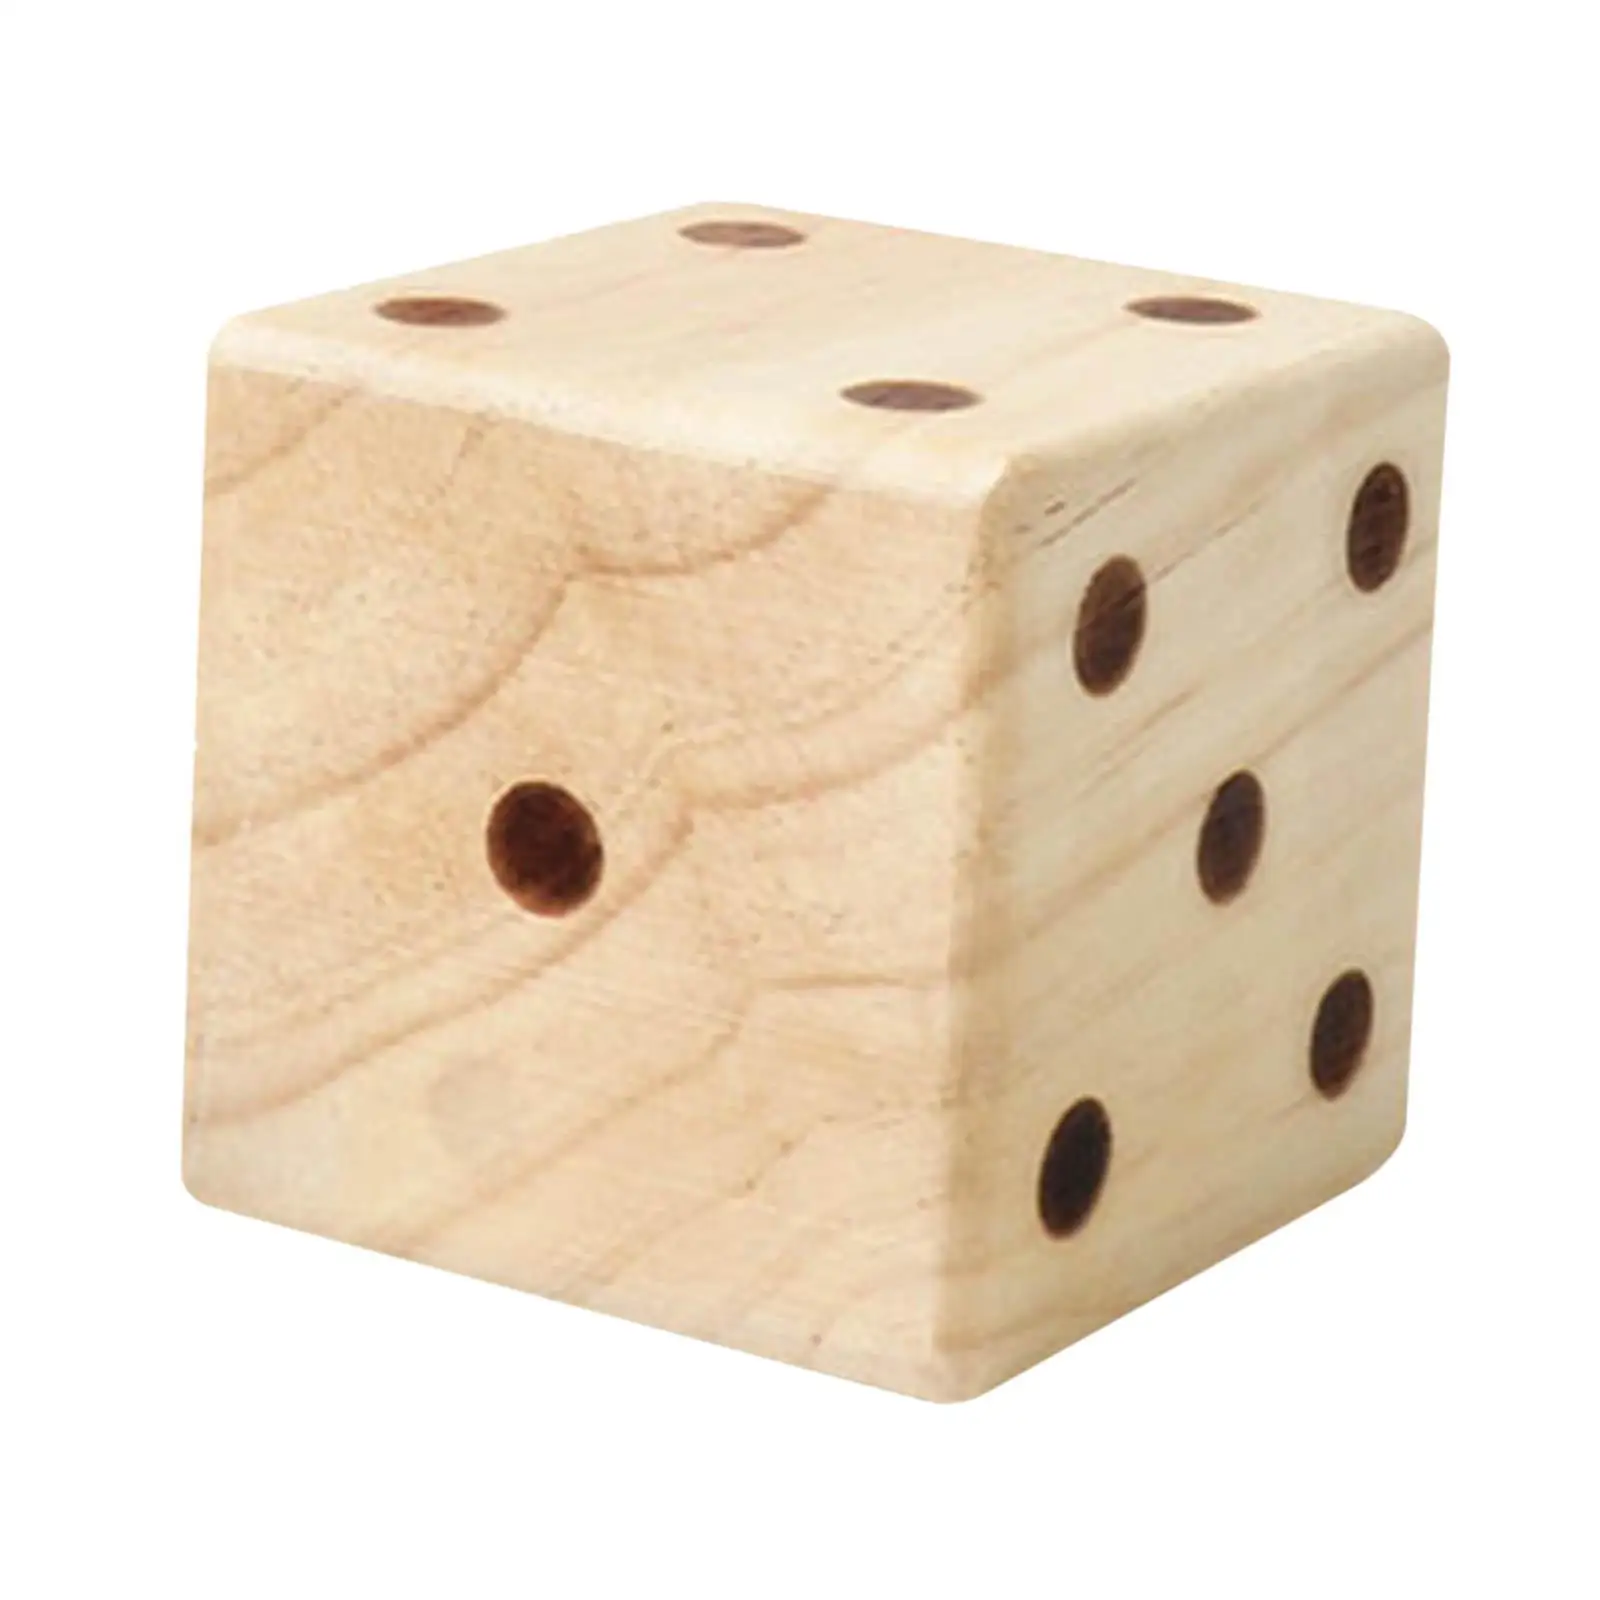 Giant Wooden Yard Dice 7cm/2.36inch Role Playing Dice for Game Outdoor Indoor Beach Family Adults